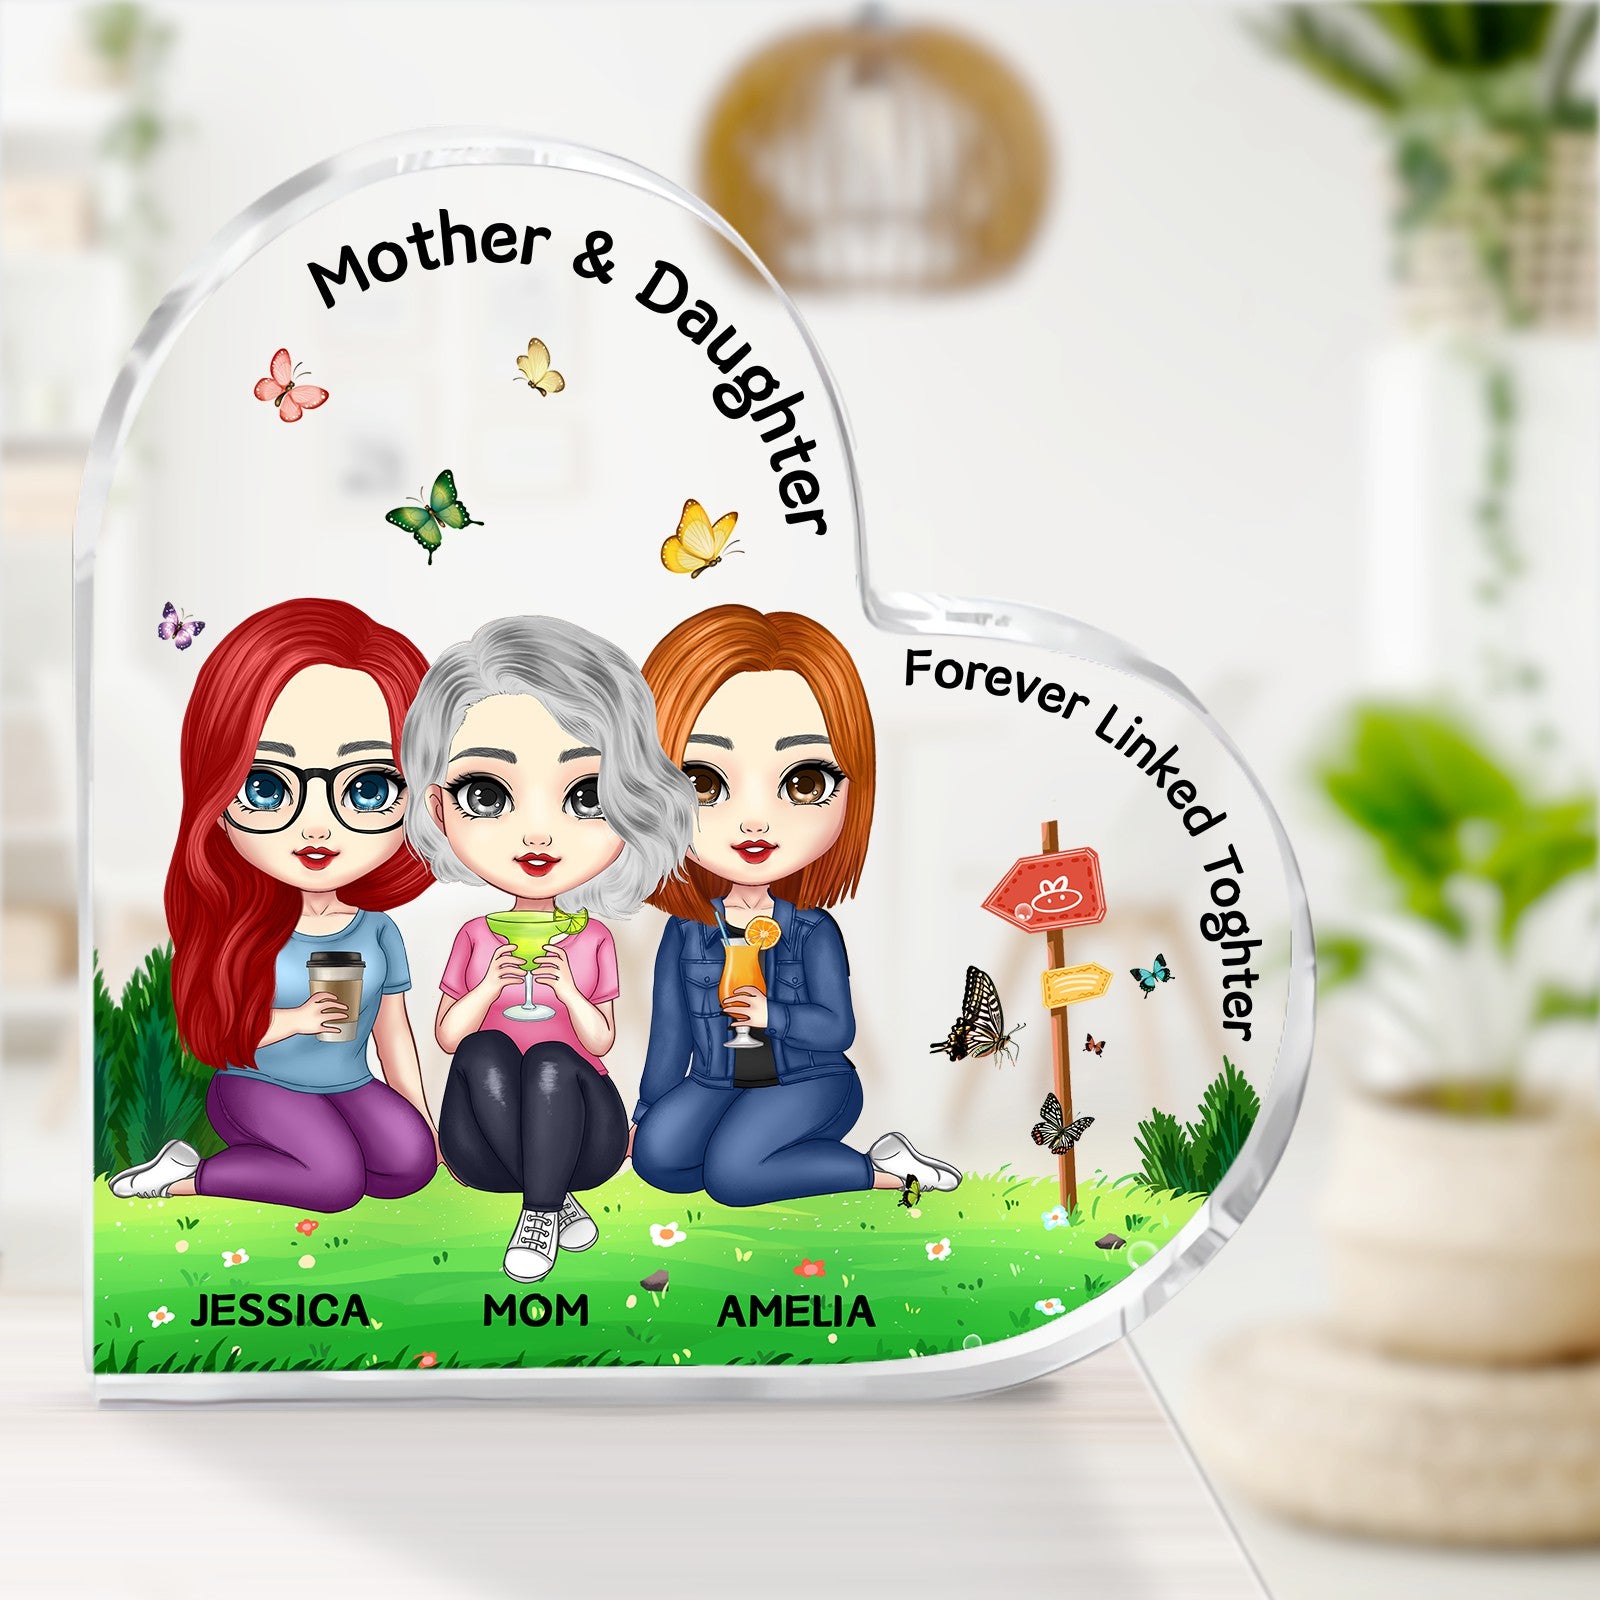 Personalized Acrylic Heart Plaque Pretty Cartoon Sitting Mom Daughter Forever Linked Together - colorfulcustom